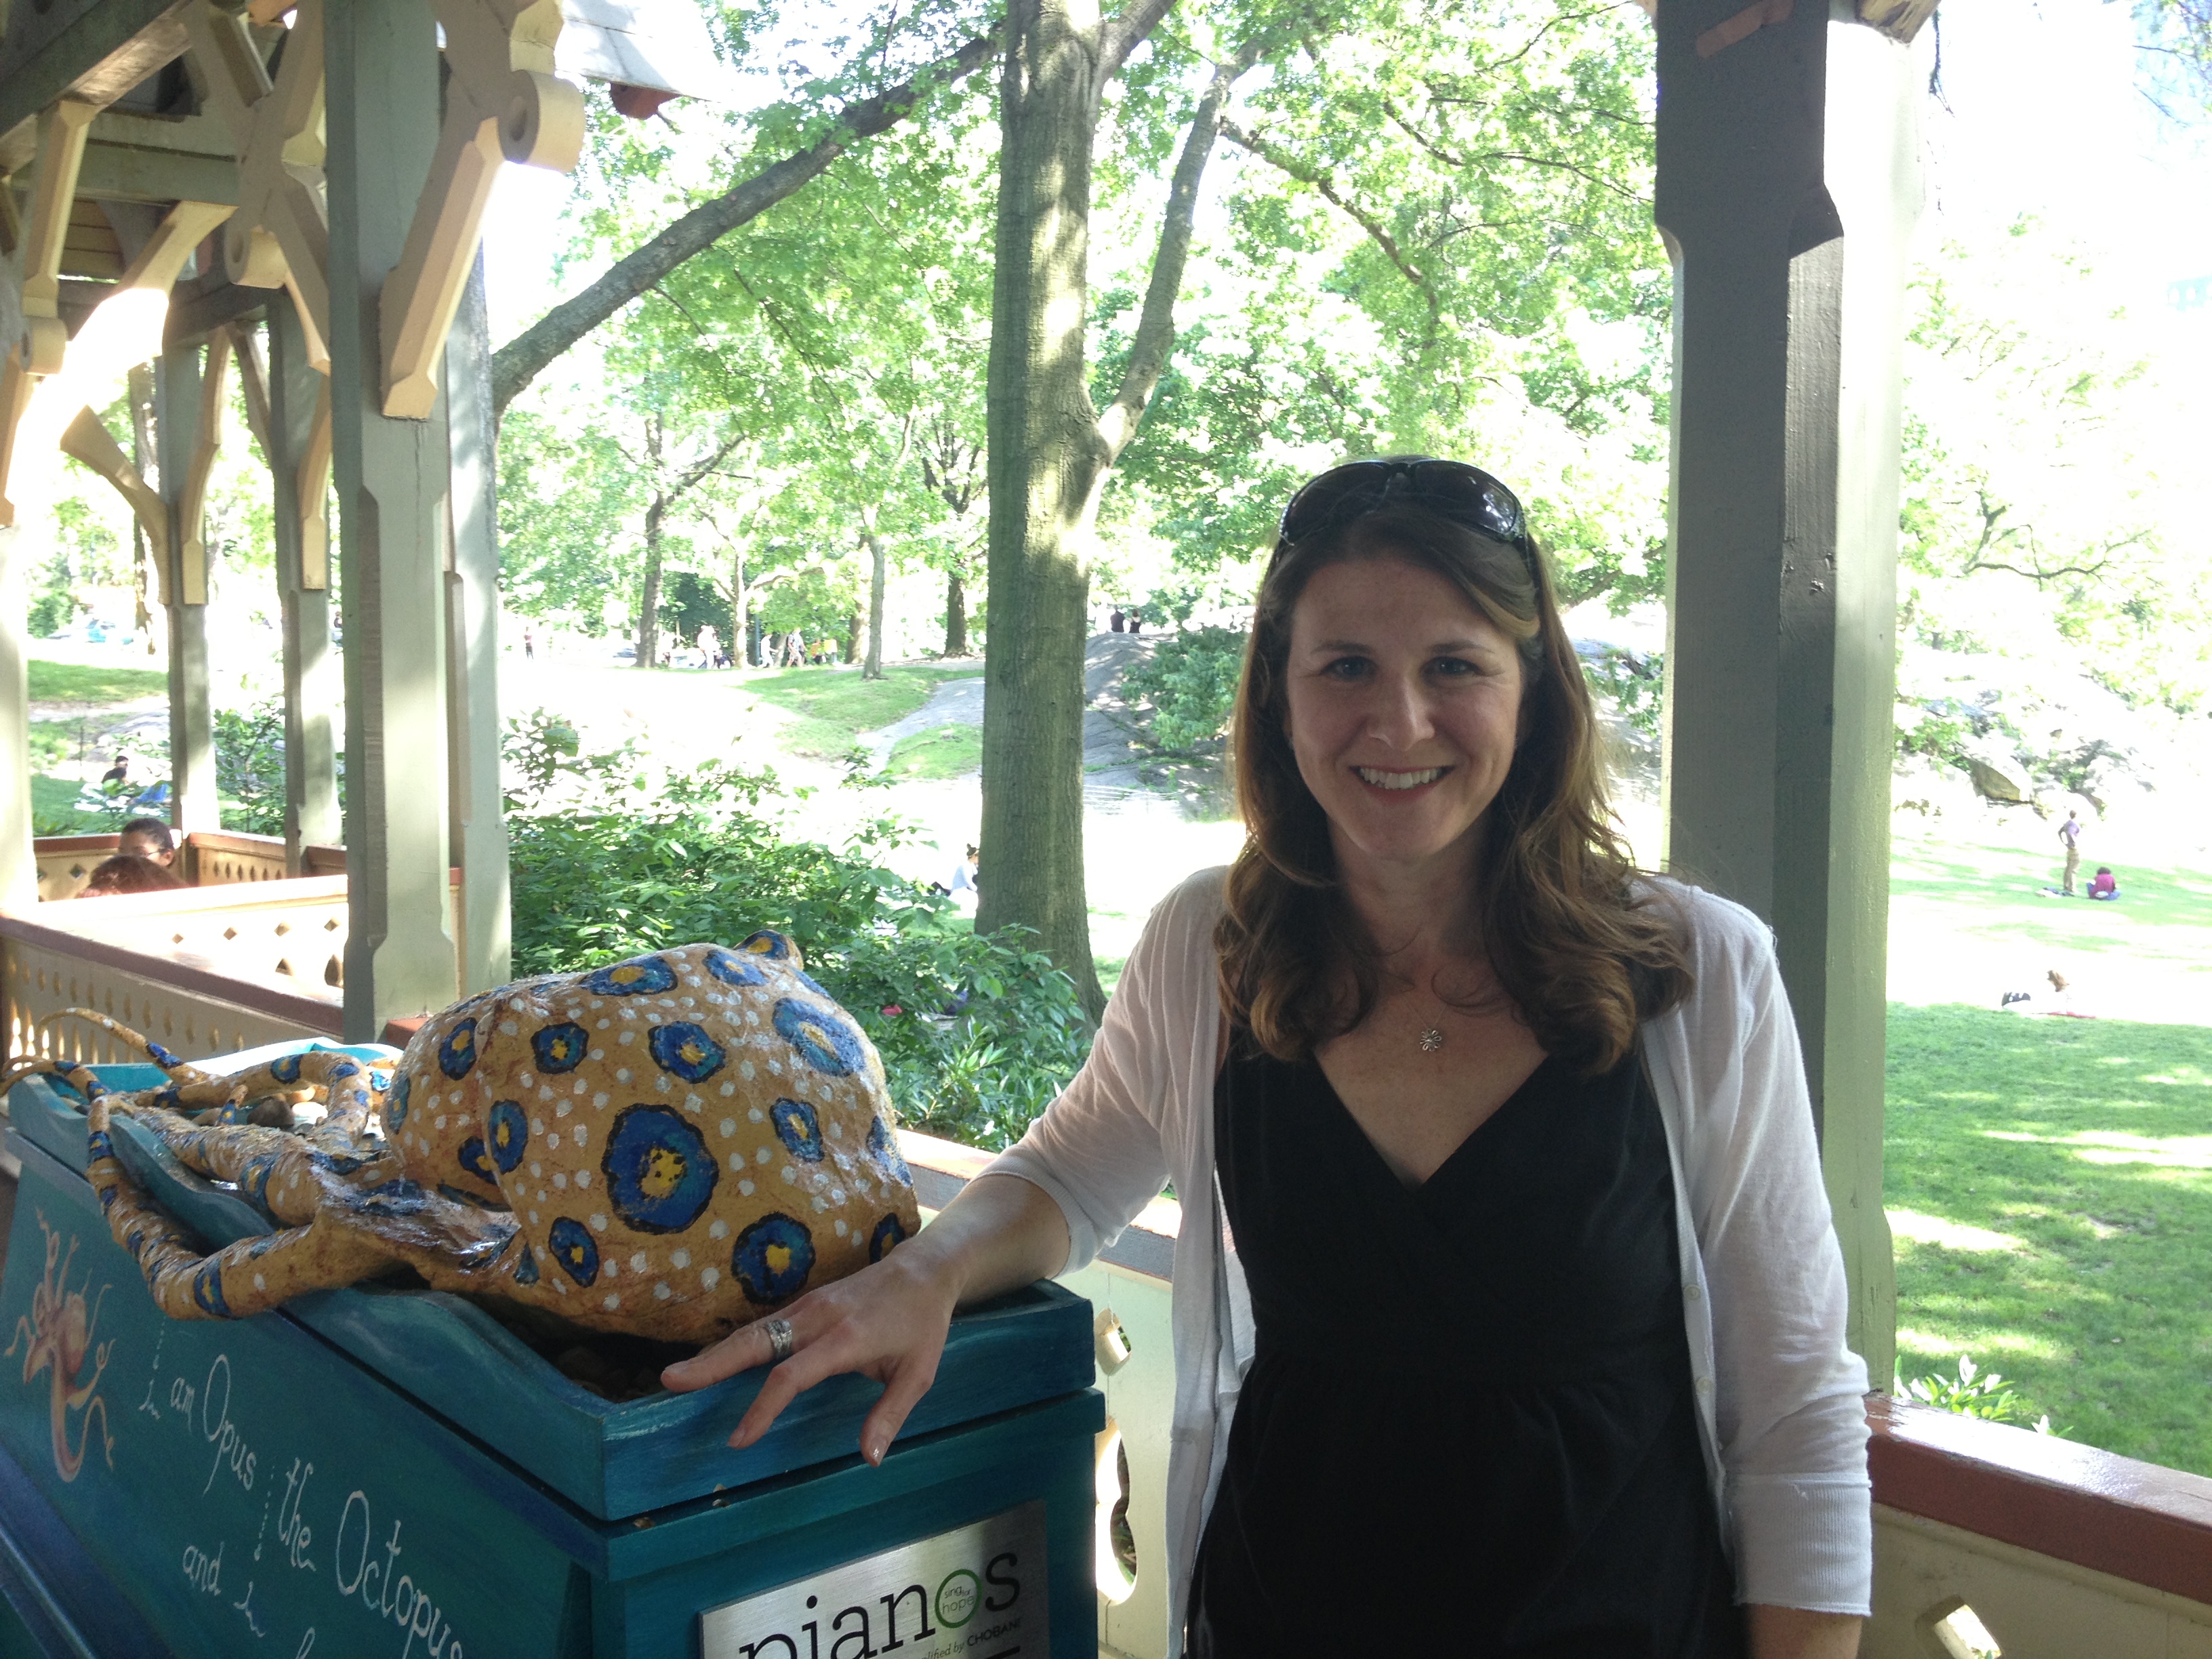 Stacy_Schwartz poses against blue piano with octopus sculpture in central park